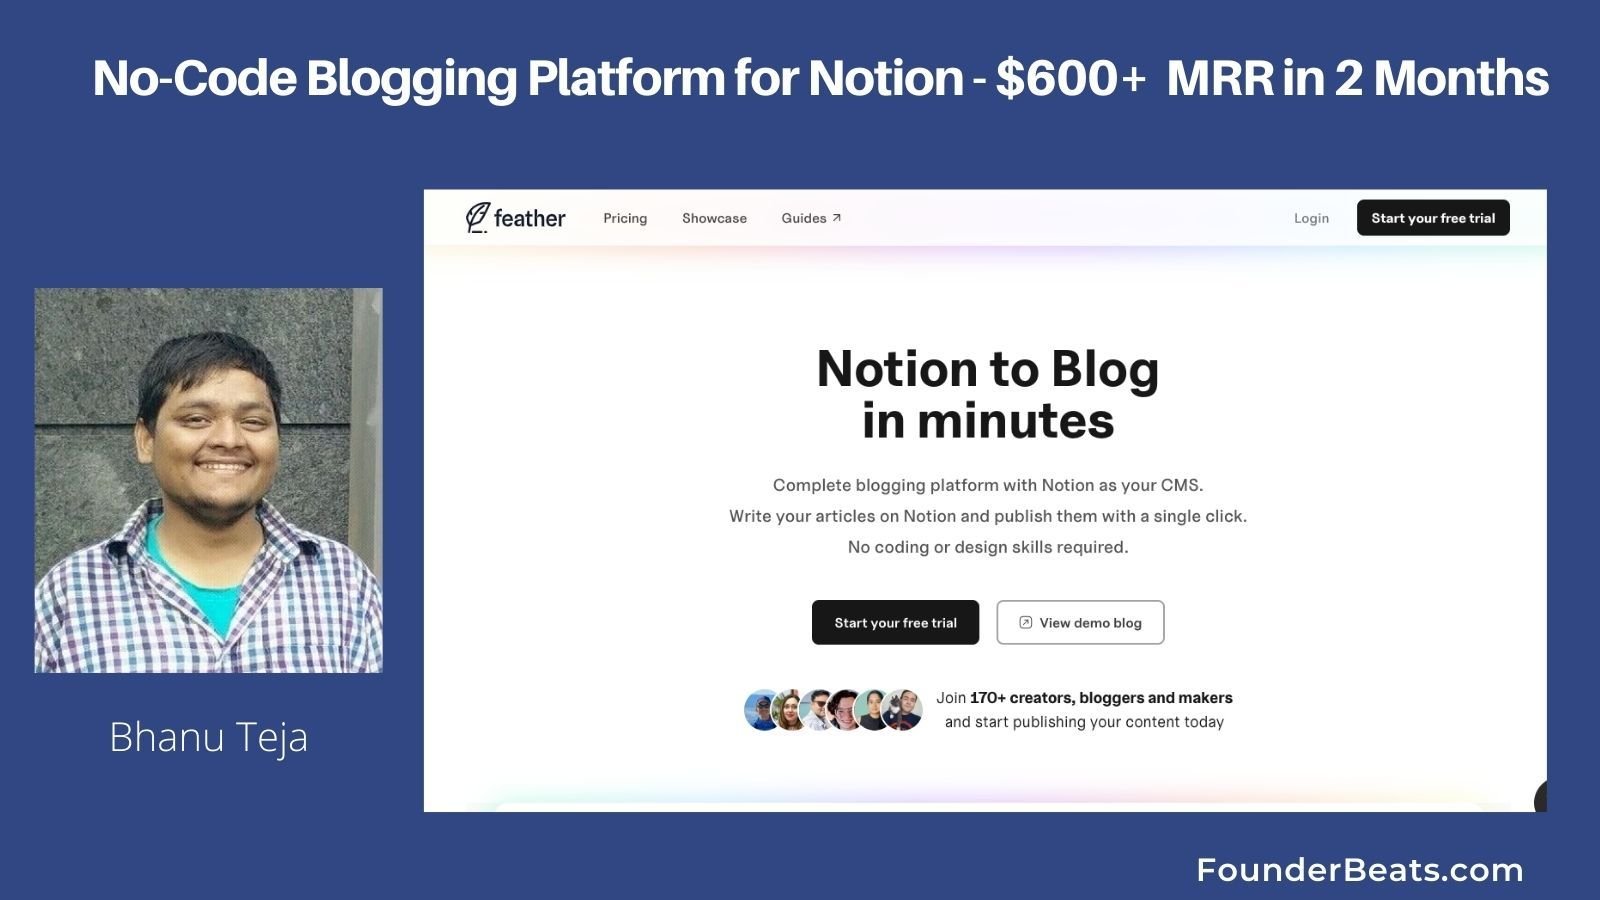 Bhanu Teja Grew Feather -A No-Code Blogging Platform for Notion -  to $600+ in MRR in only two months